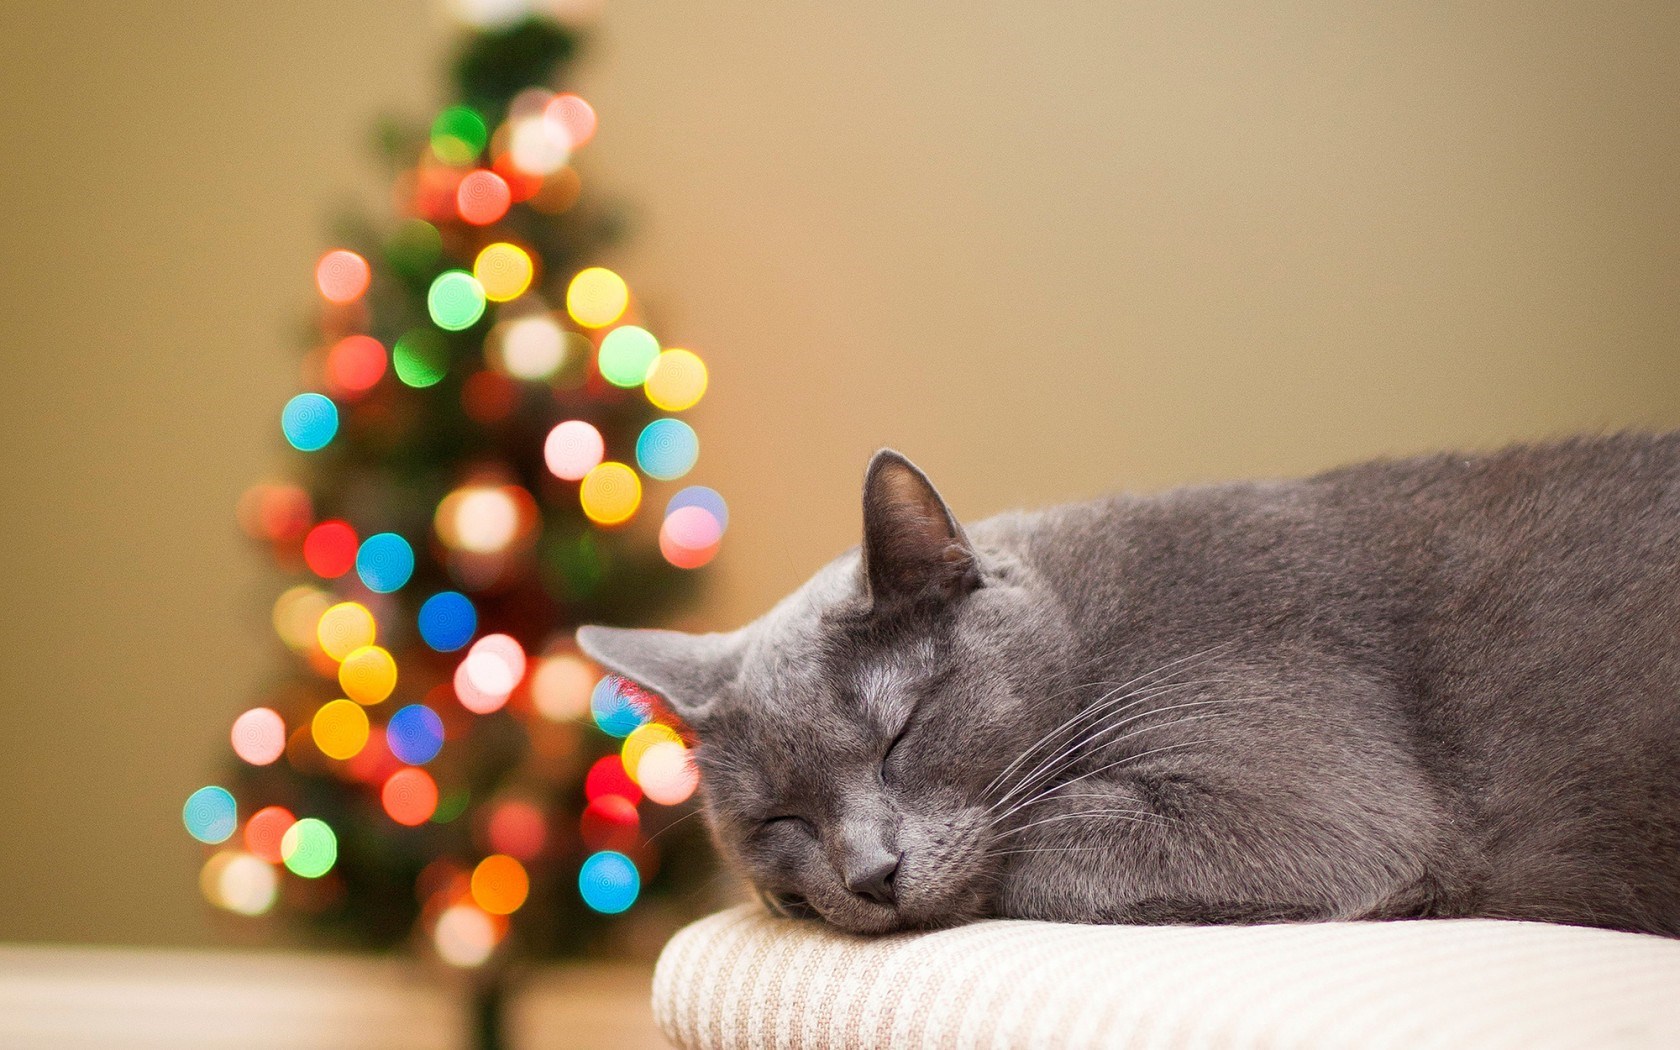 Cat Gray Rest Christmas Tree Lights Bokeh Holiday New Year